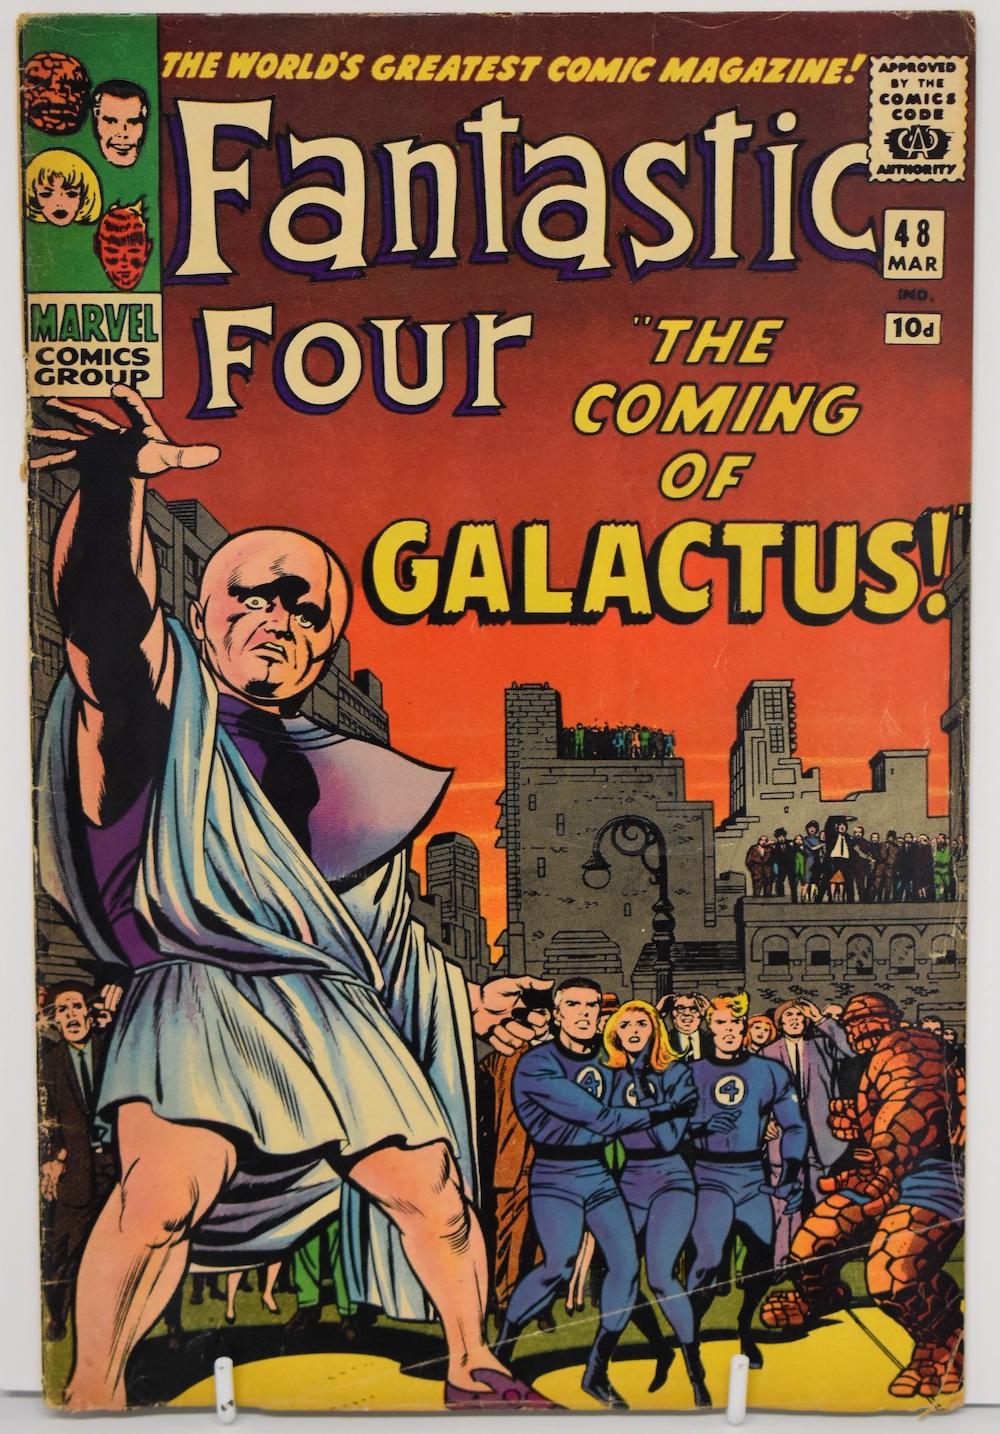 Fantastic Four Issue #48 By Marvel Comics, First Appearance Of Silver Surfer And Galactus (Cameo). HAMMER Ś600